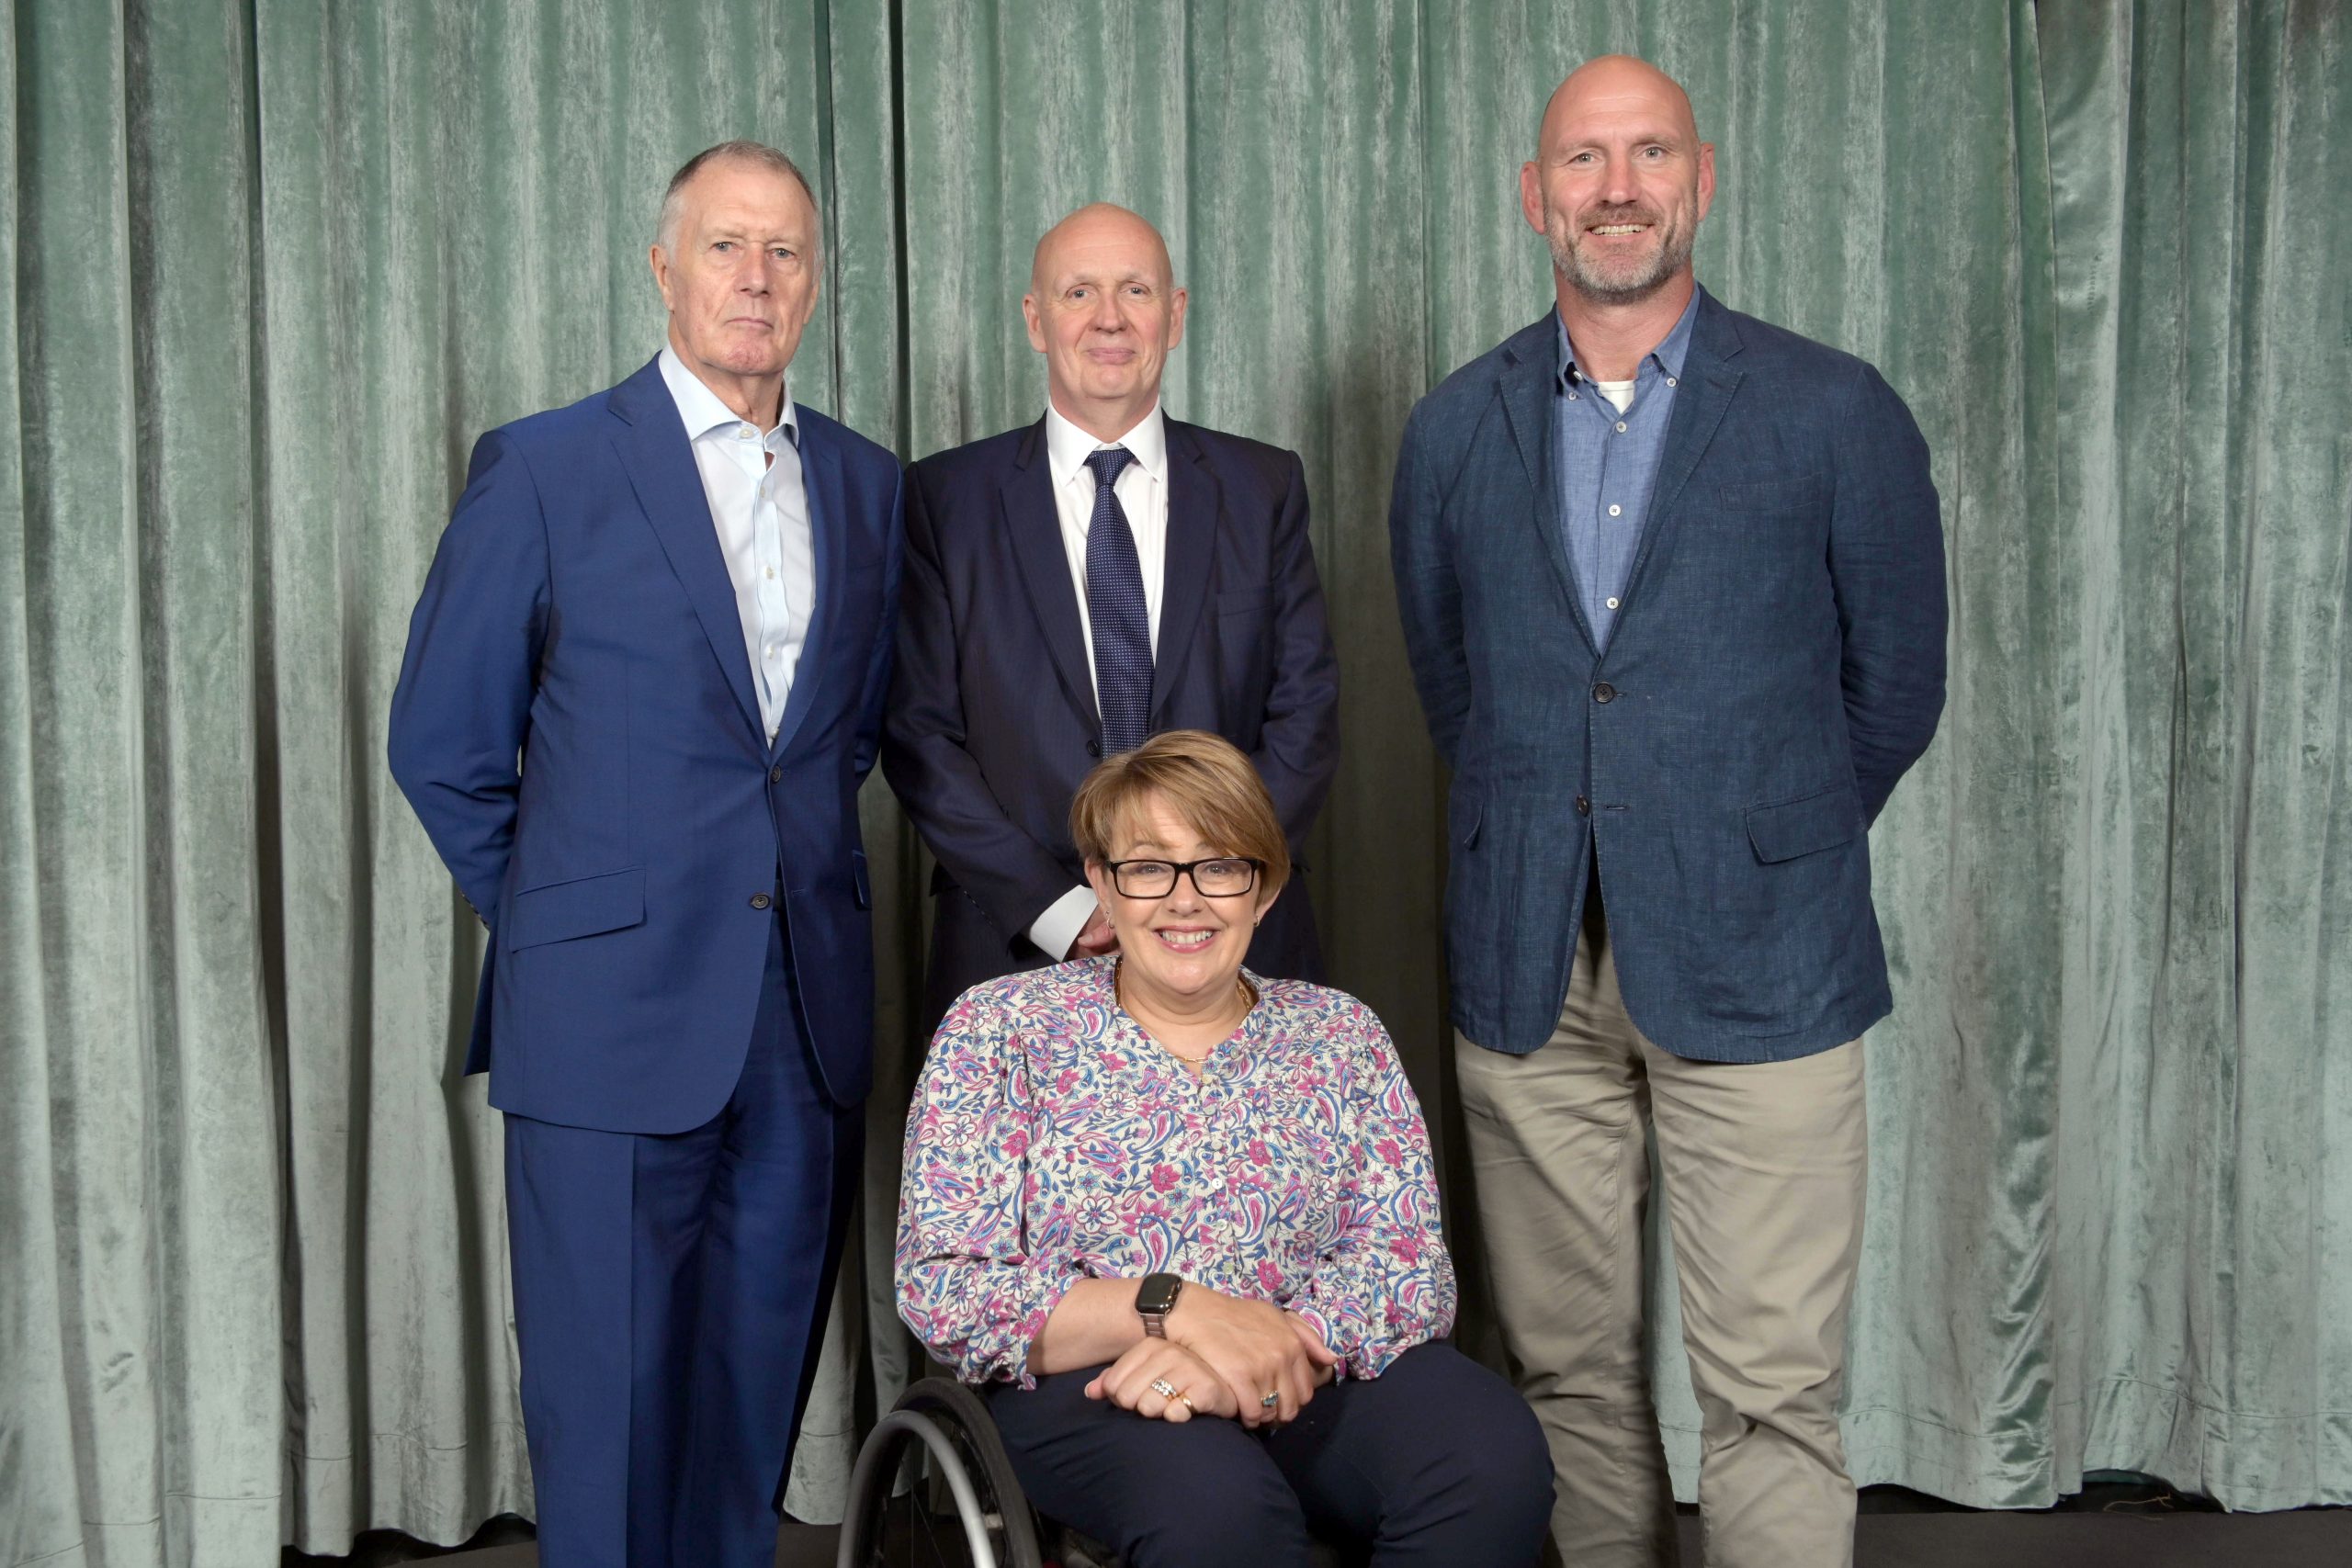 Back row right to left: Sir Geoff Hurst, Kelvin Trott and Lawrence Dallaglio; front: Baroness Tanni Grey-Thompson